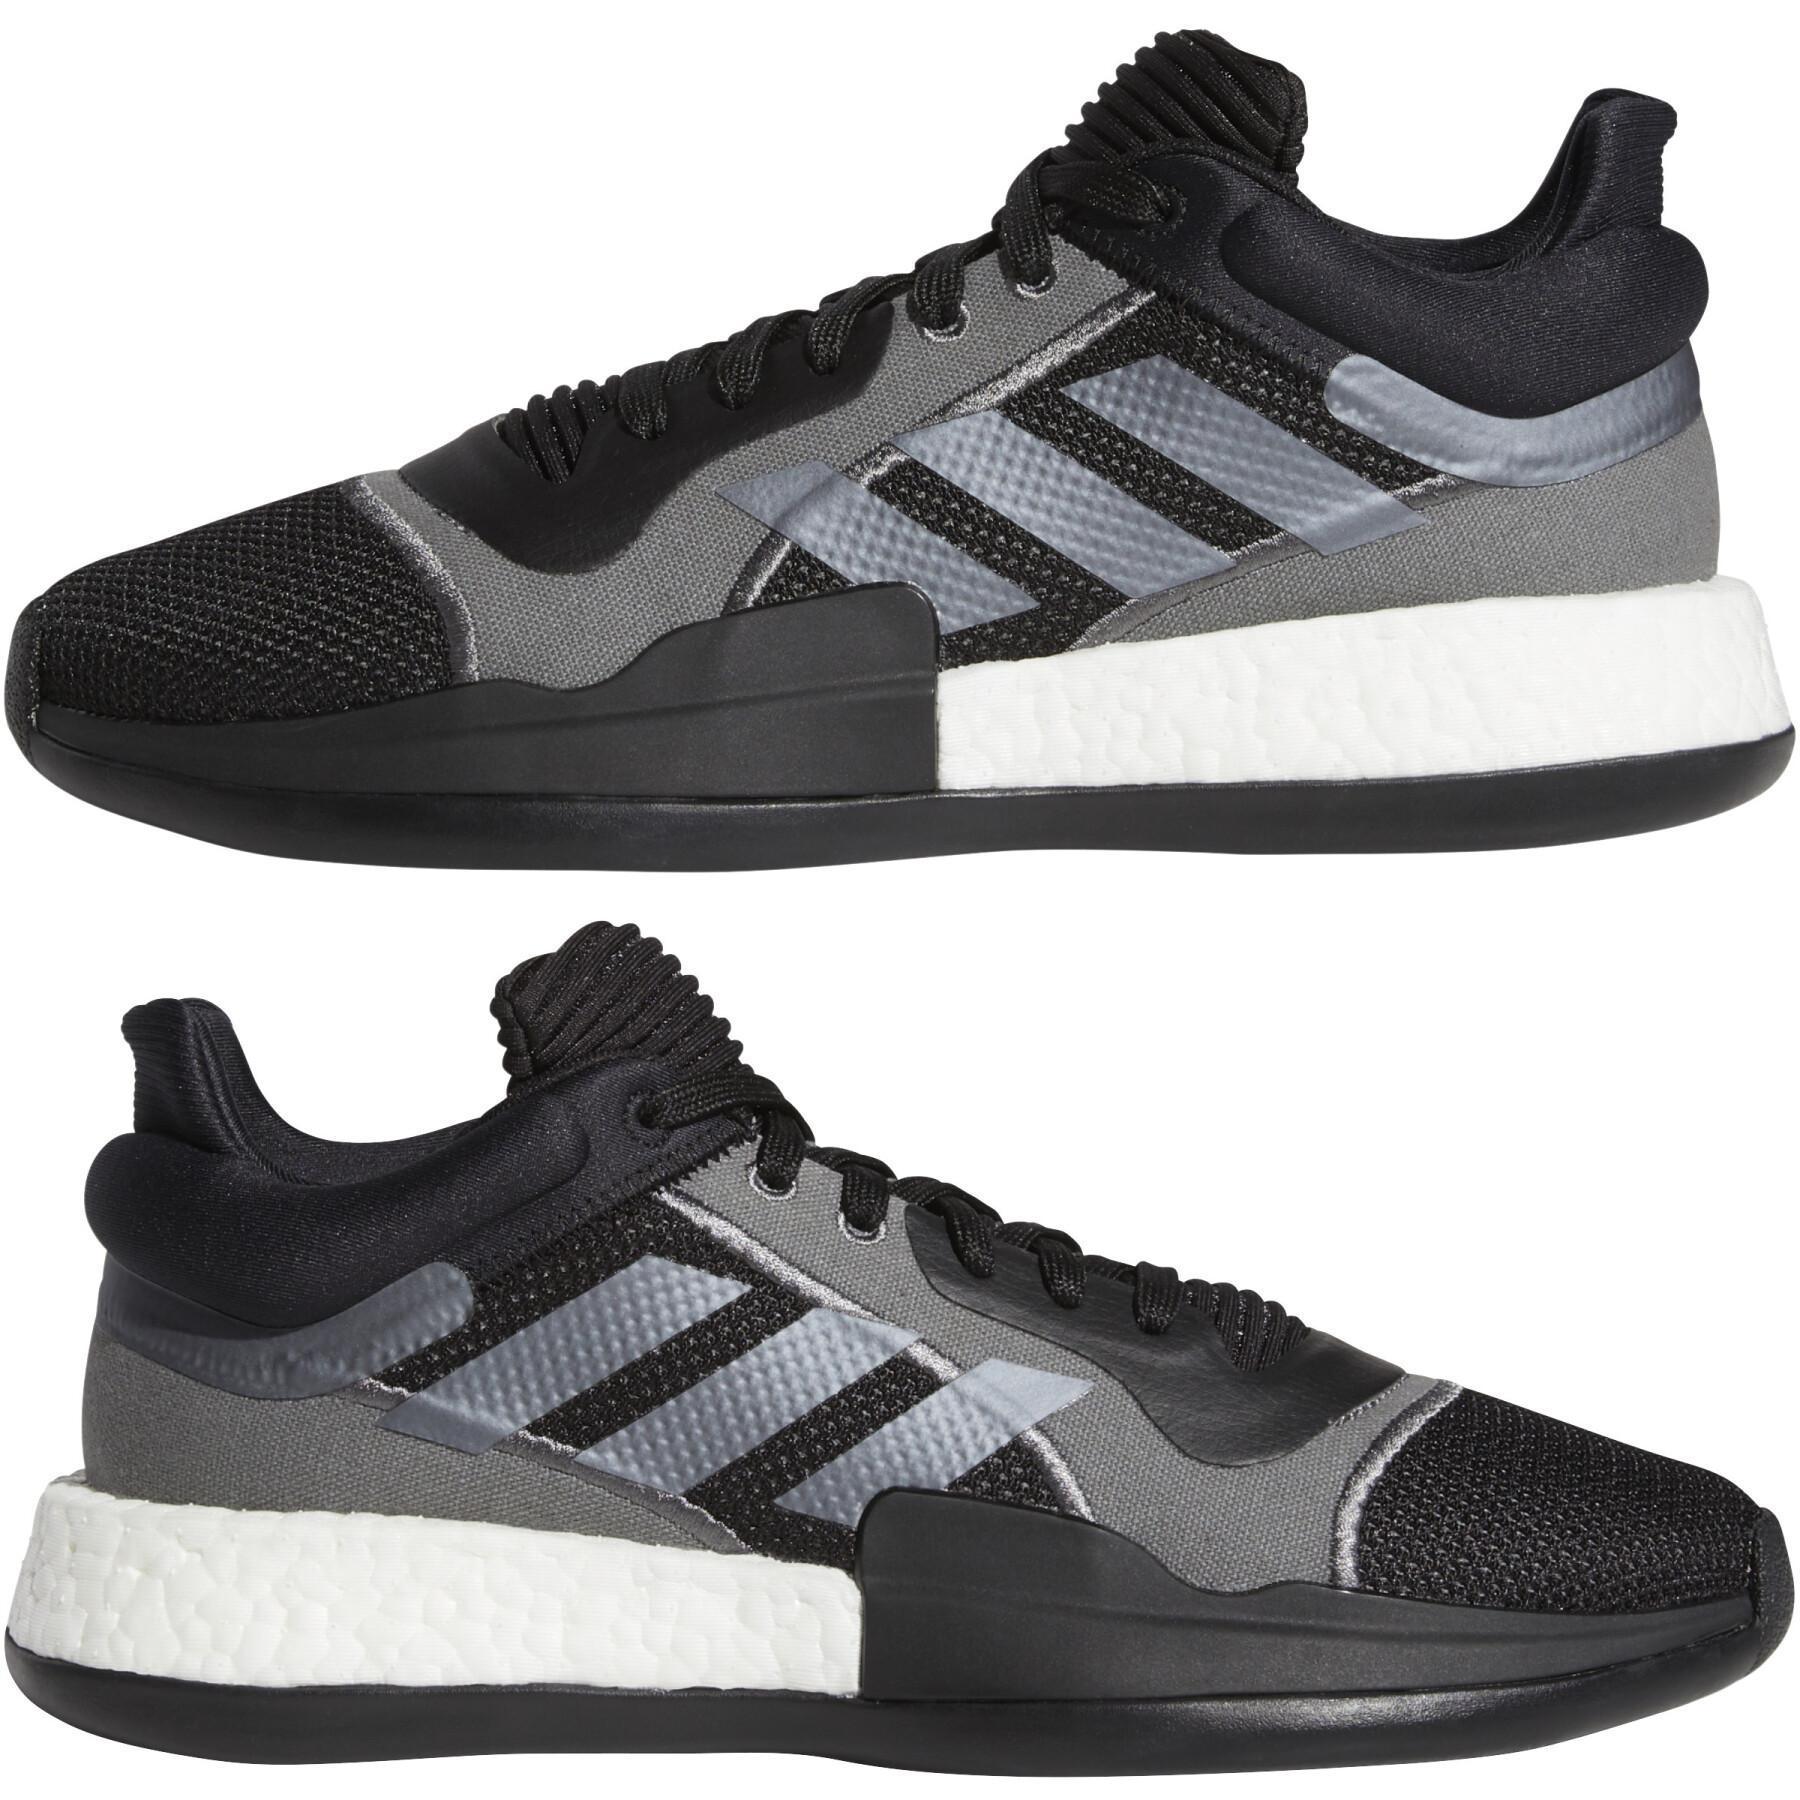 Chaussures indoor adidas Marquee Boost Low